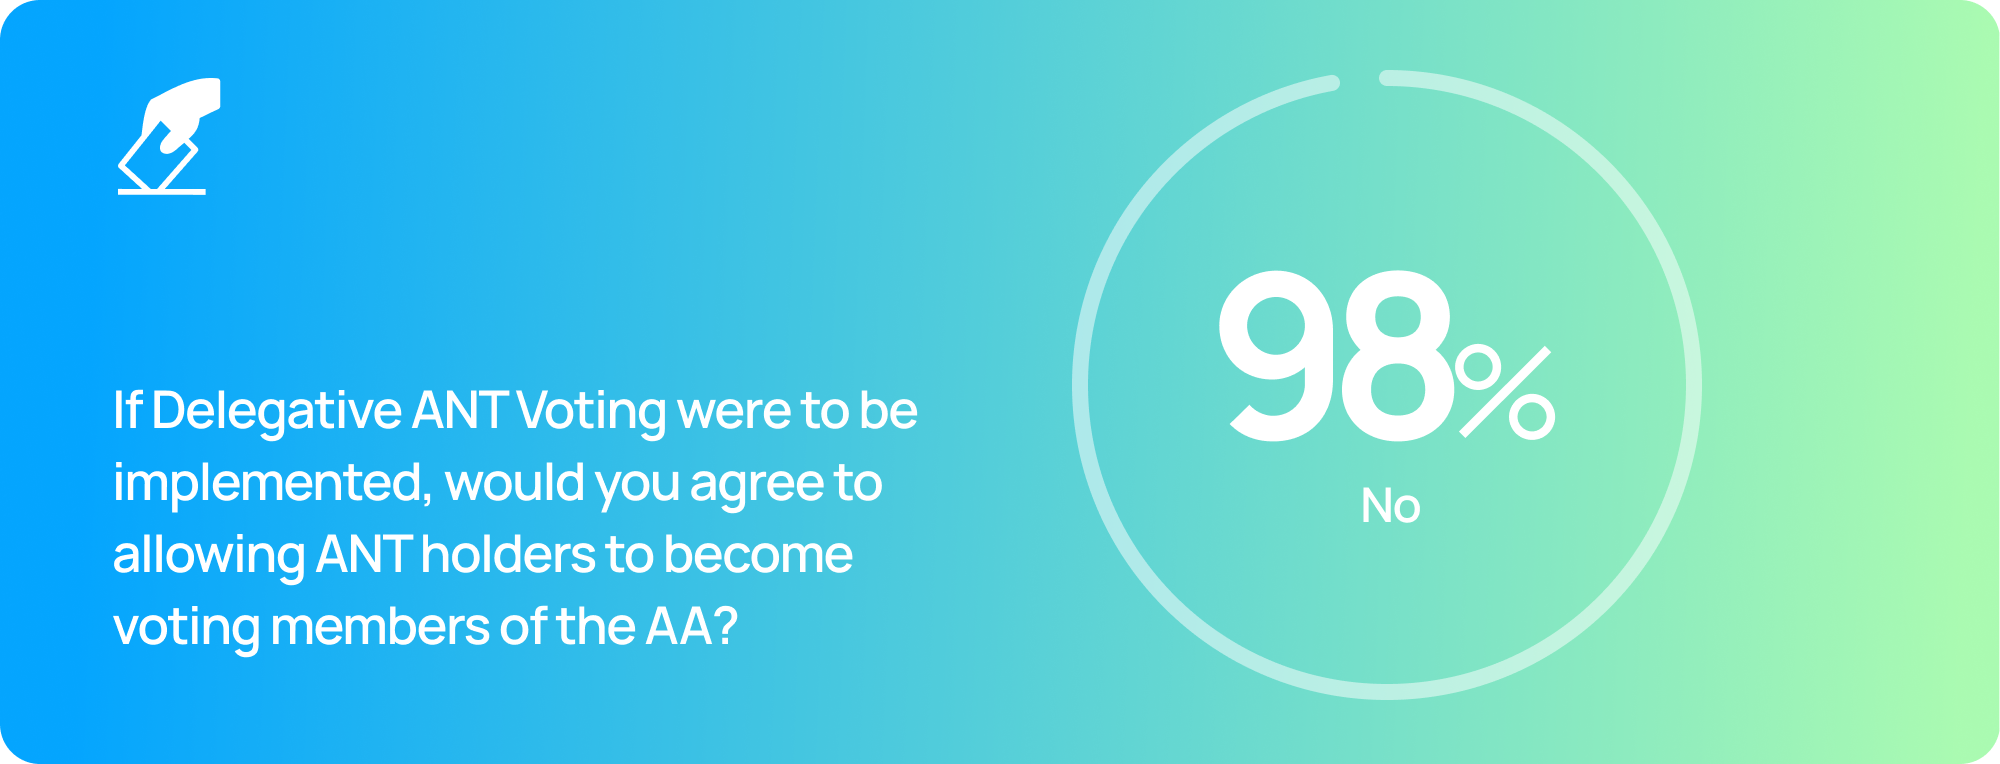 98% ANT holders not in favor to become voting members of the AA